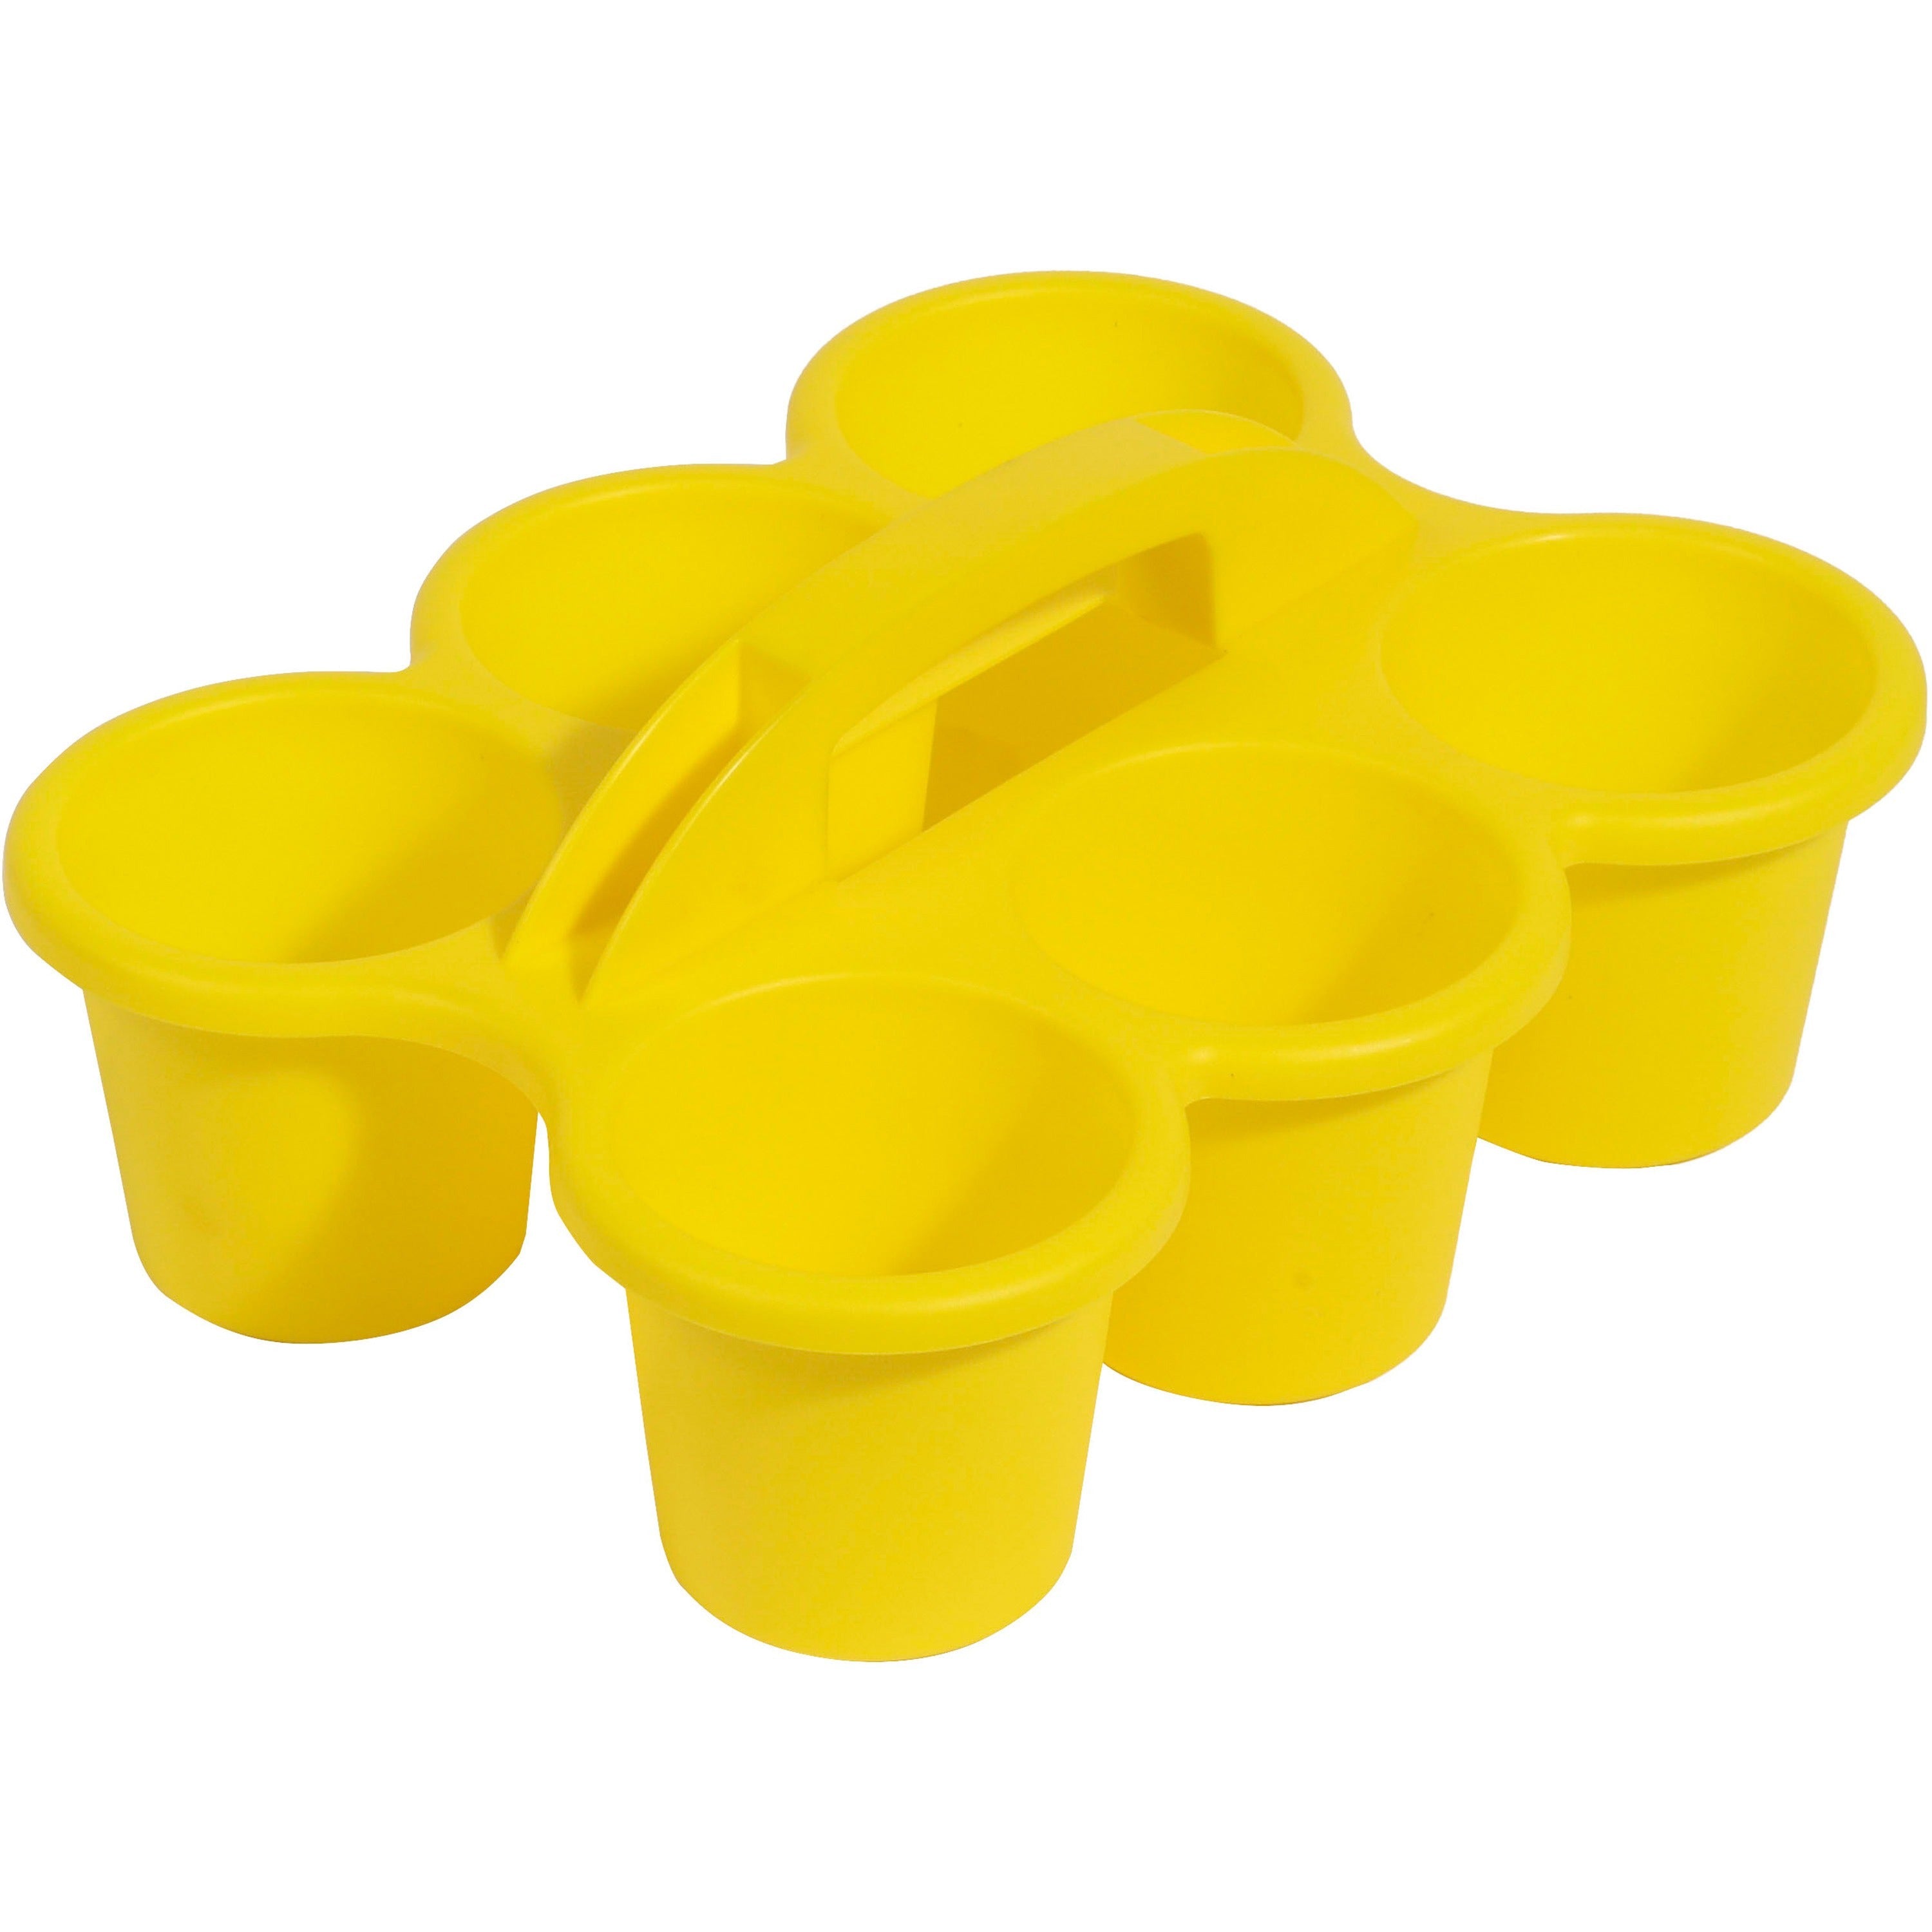 deflecto-antimicrobial-kids-6-cup-caddy-6-compartments-53-height-x-121-width-x-96-depth-lightweight-portable-antimicrobial-easy-to-clean-handle-stackable-mildew-resistant-yellow-plastic-polypropylene_def39509yel - 1